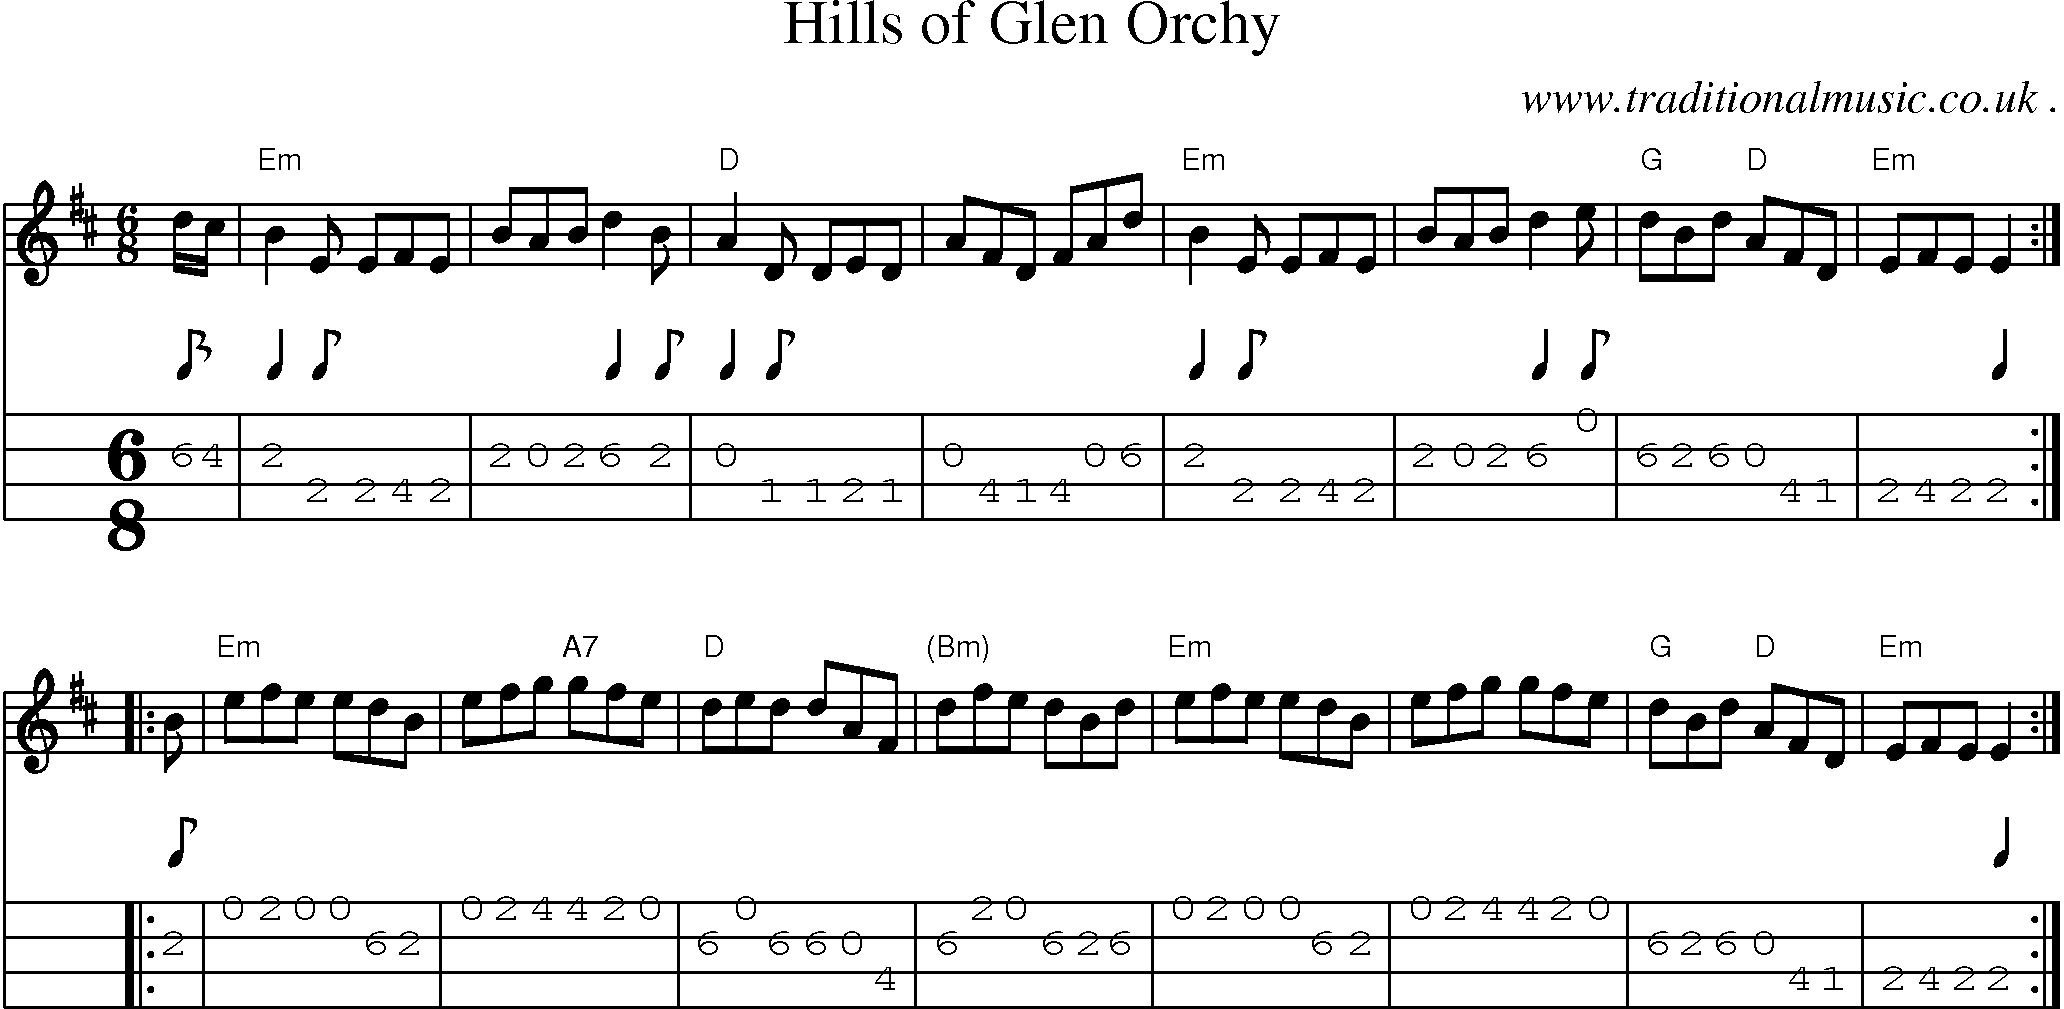 Sheet-music  score, Chords and Mandolin Tabs for Hills Of Glen Orchy